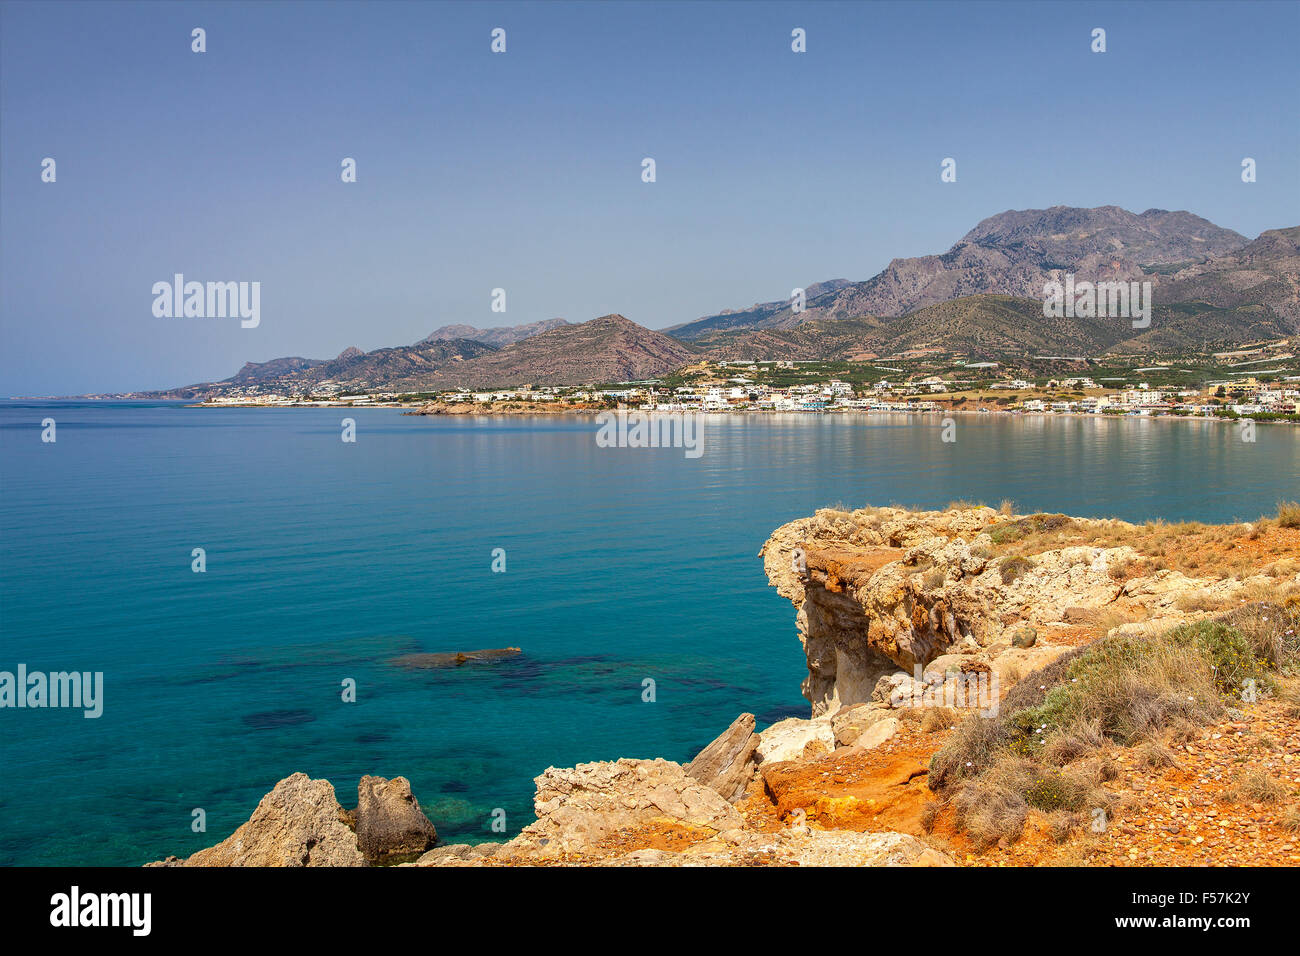 Image of the hilly south-east coast of Crete, Greece. Stock Photo